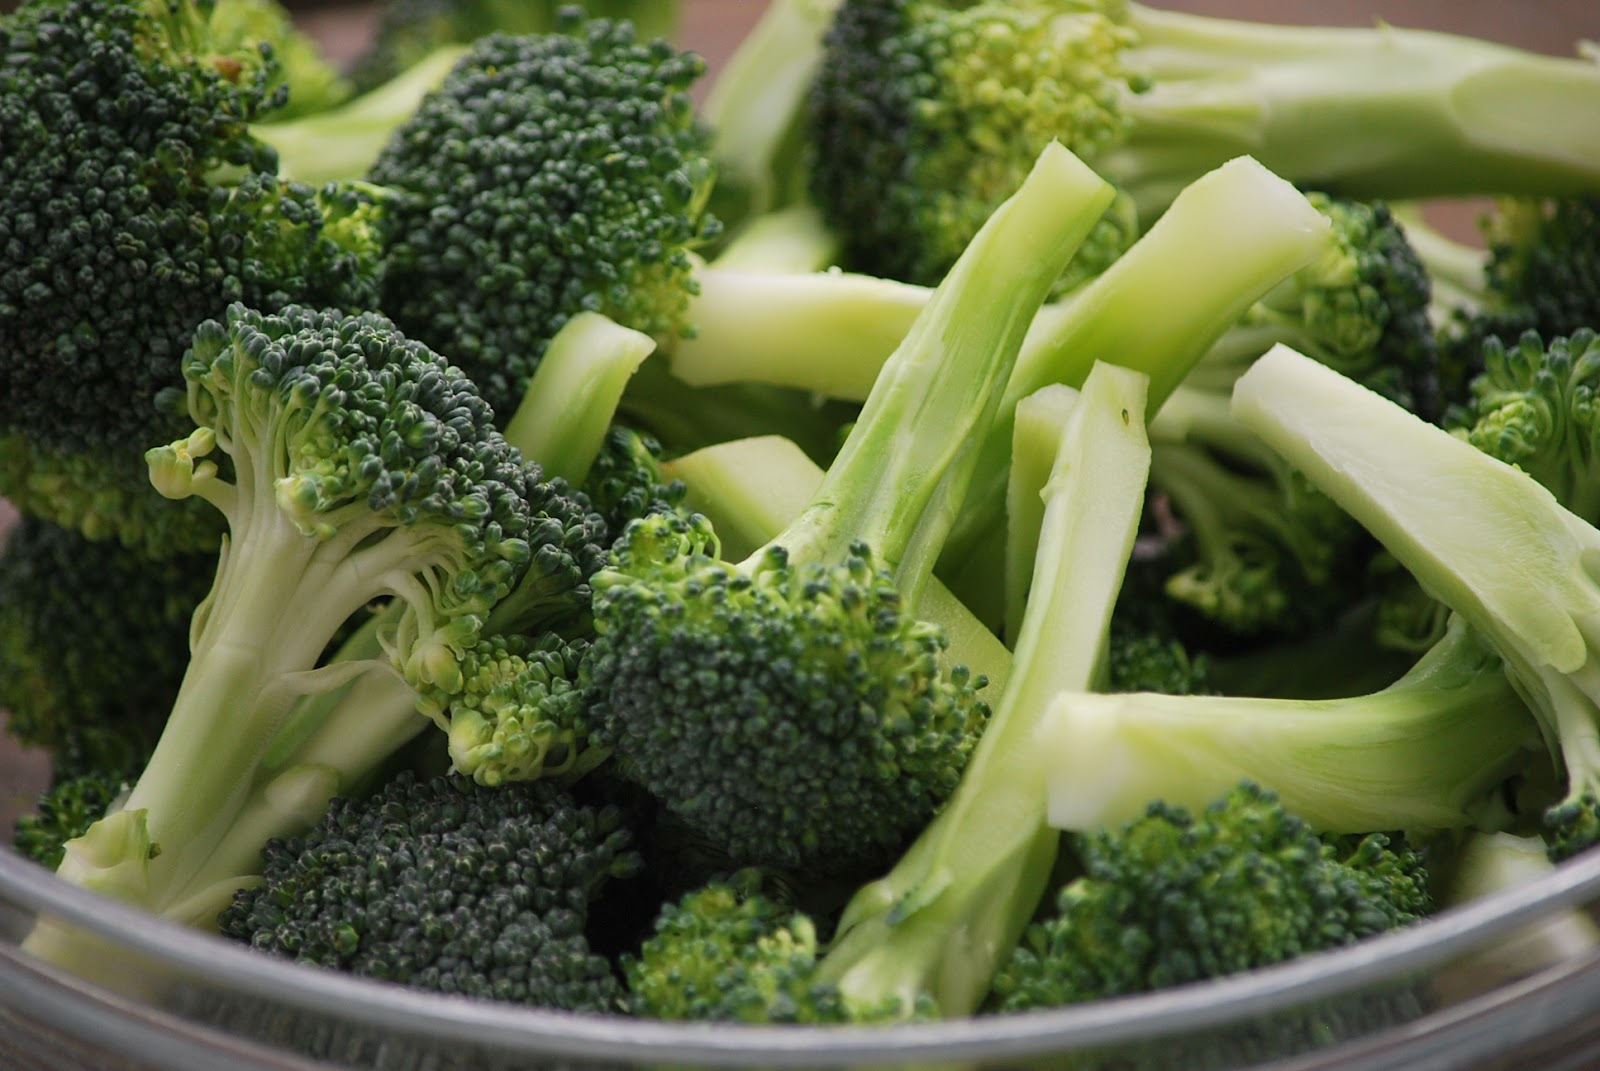 Broccoli to fight breast cancer